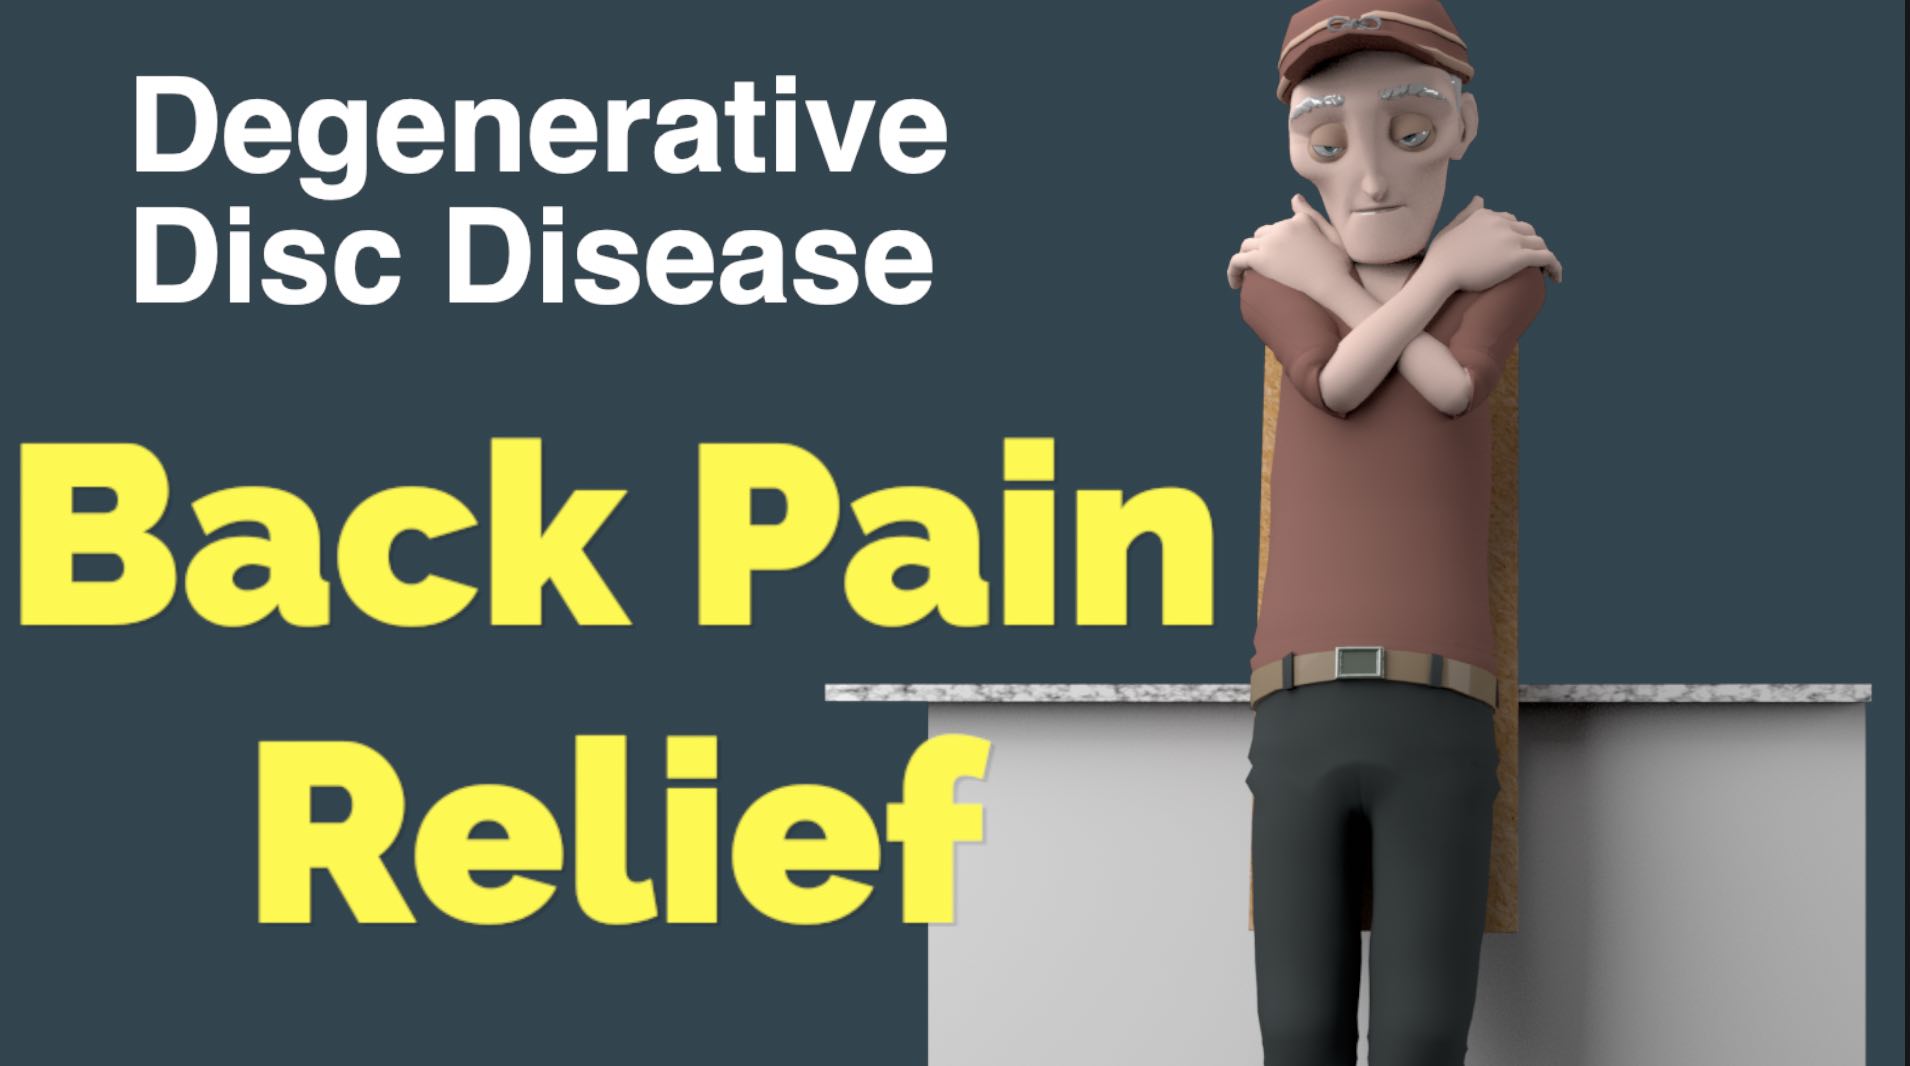 Degenerative disc disease: causes, symptoms & things to avoid with DDD